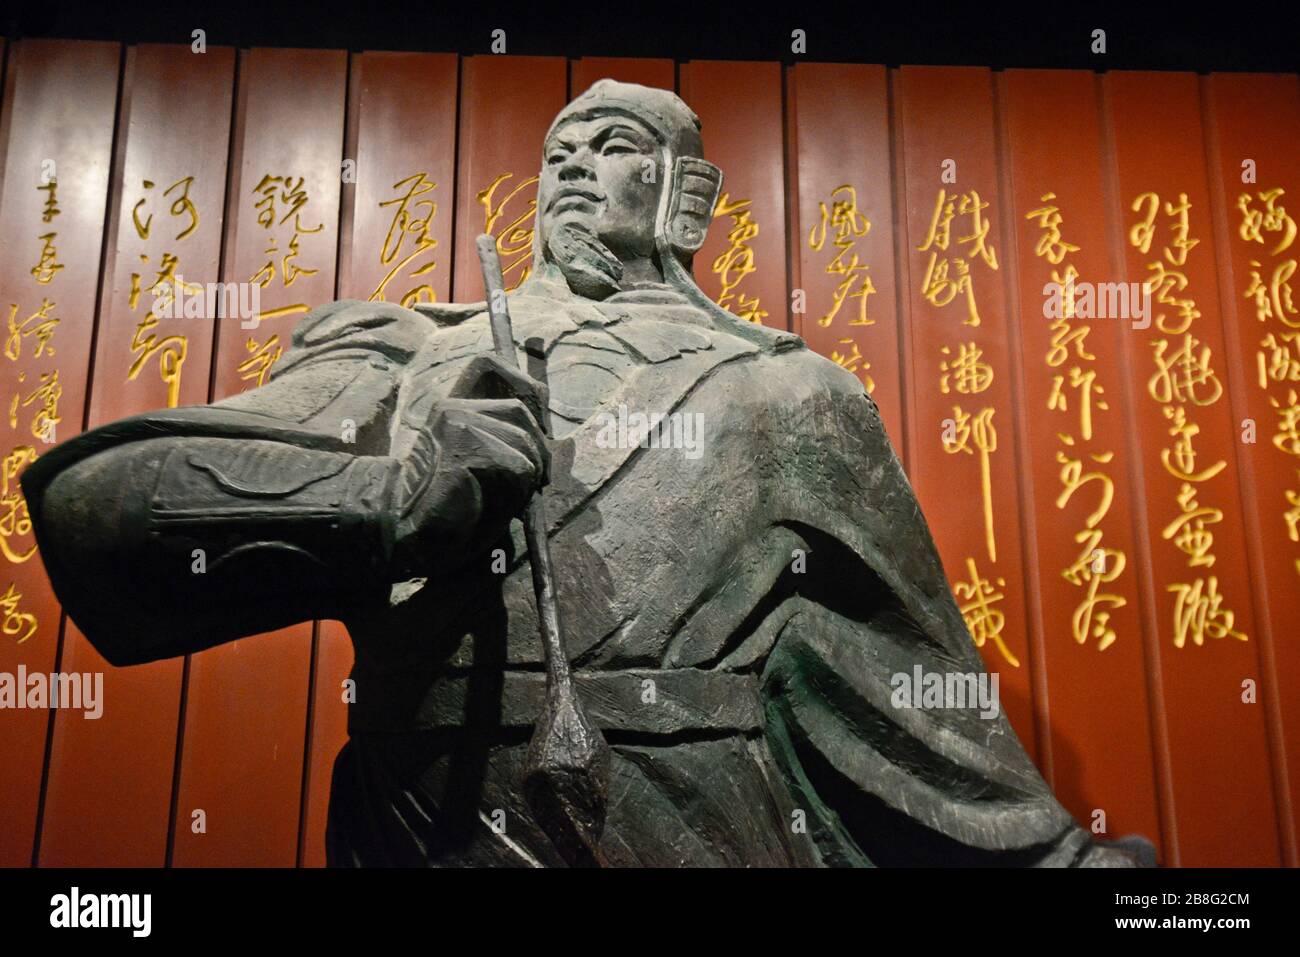 Sculpture of Yue Fei (1103 - 1142), famous general in the Song Dynasty. Wuhan Museum, China Stock Photo